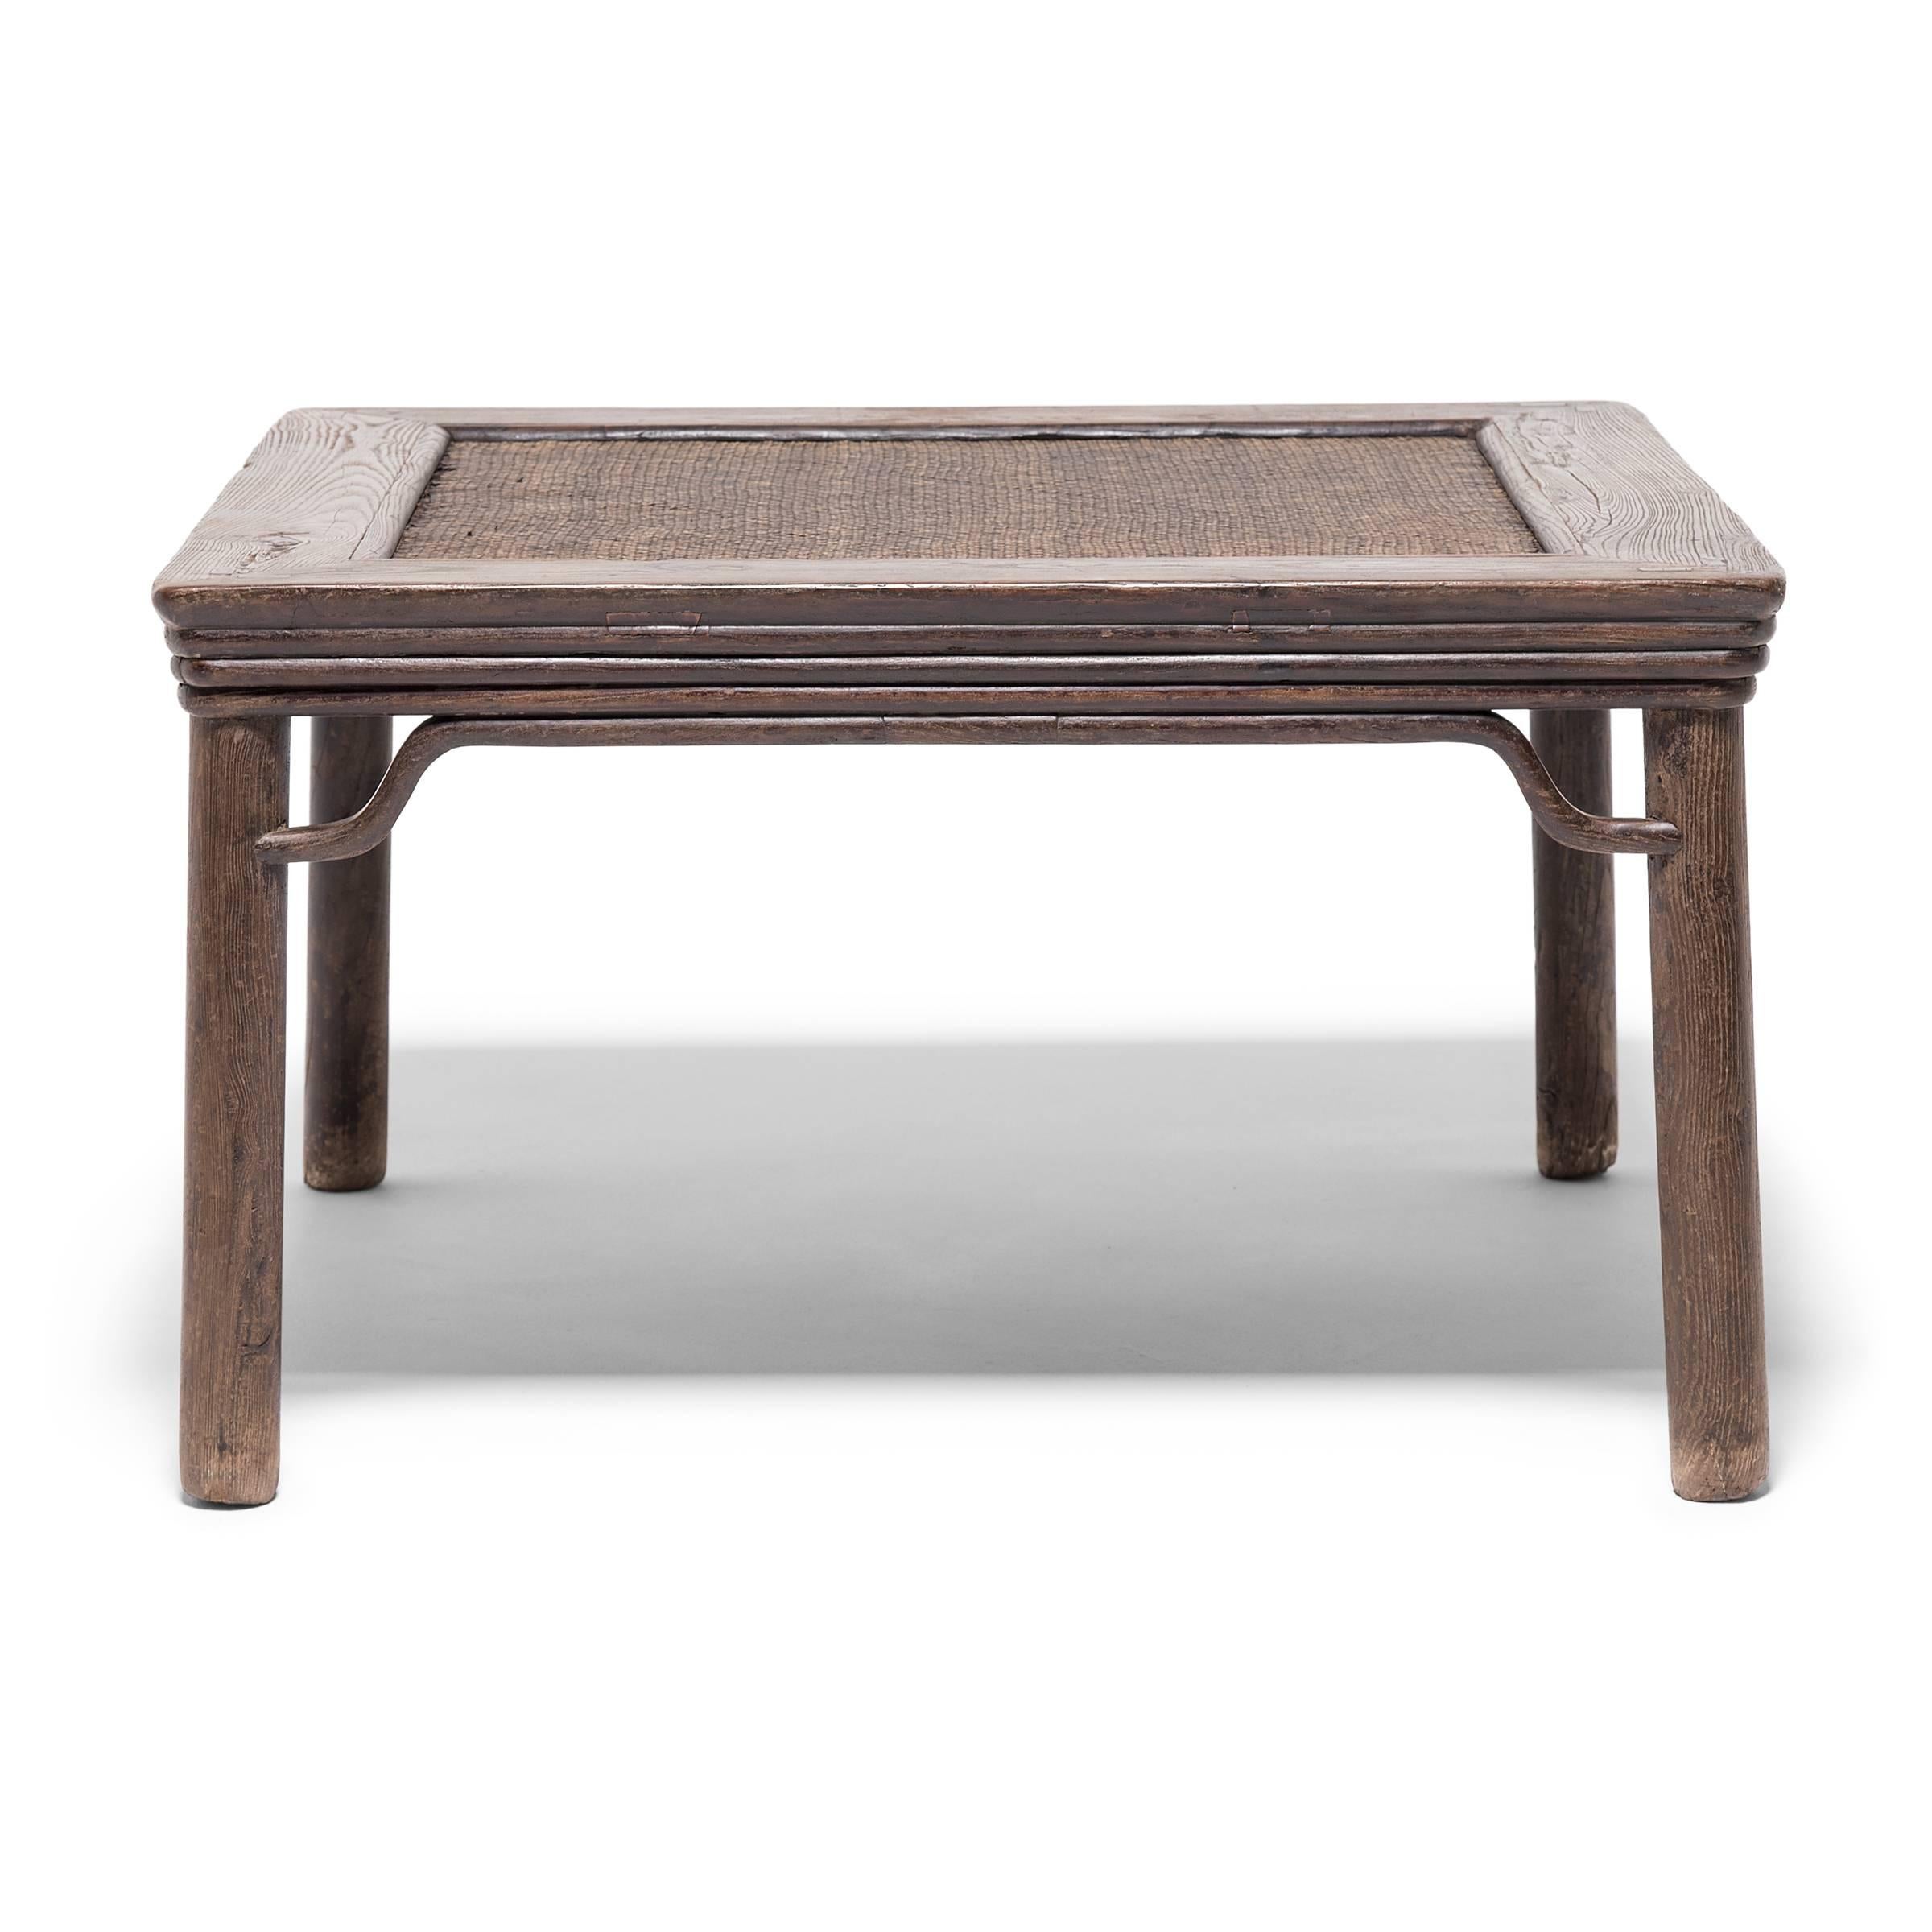 Qing Chinese Woven Top Square Table, c. 1900 For Sale